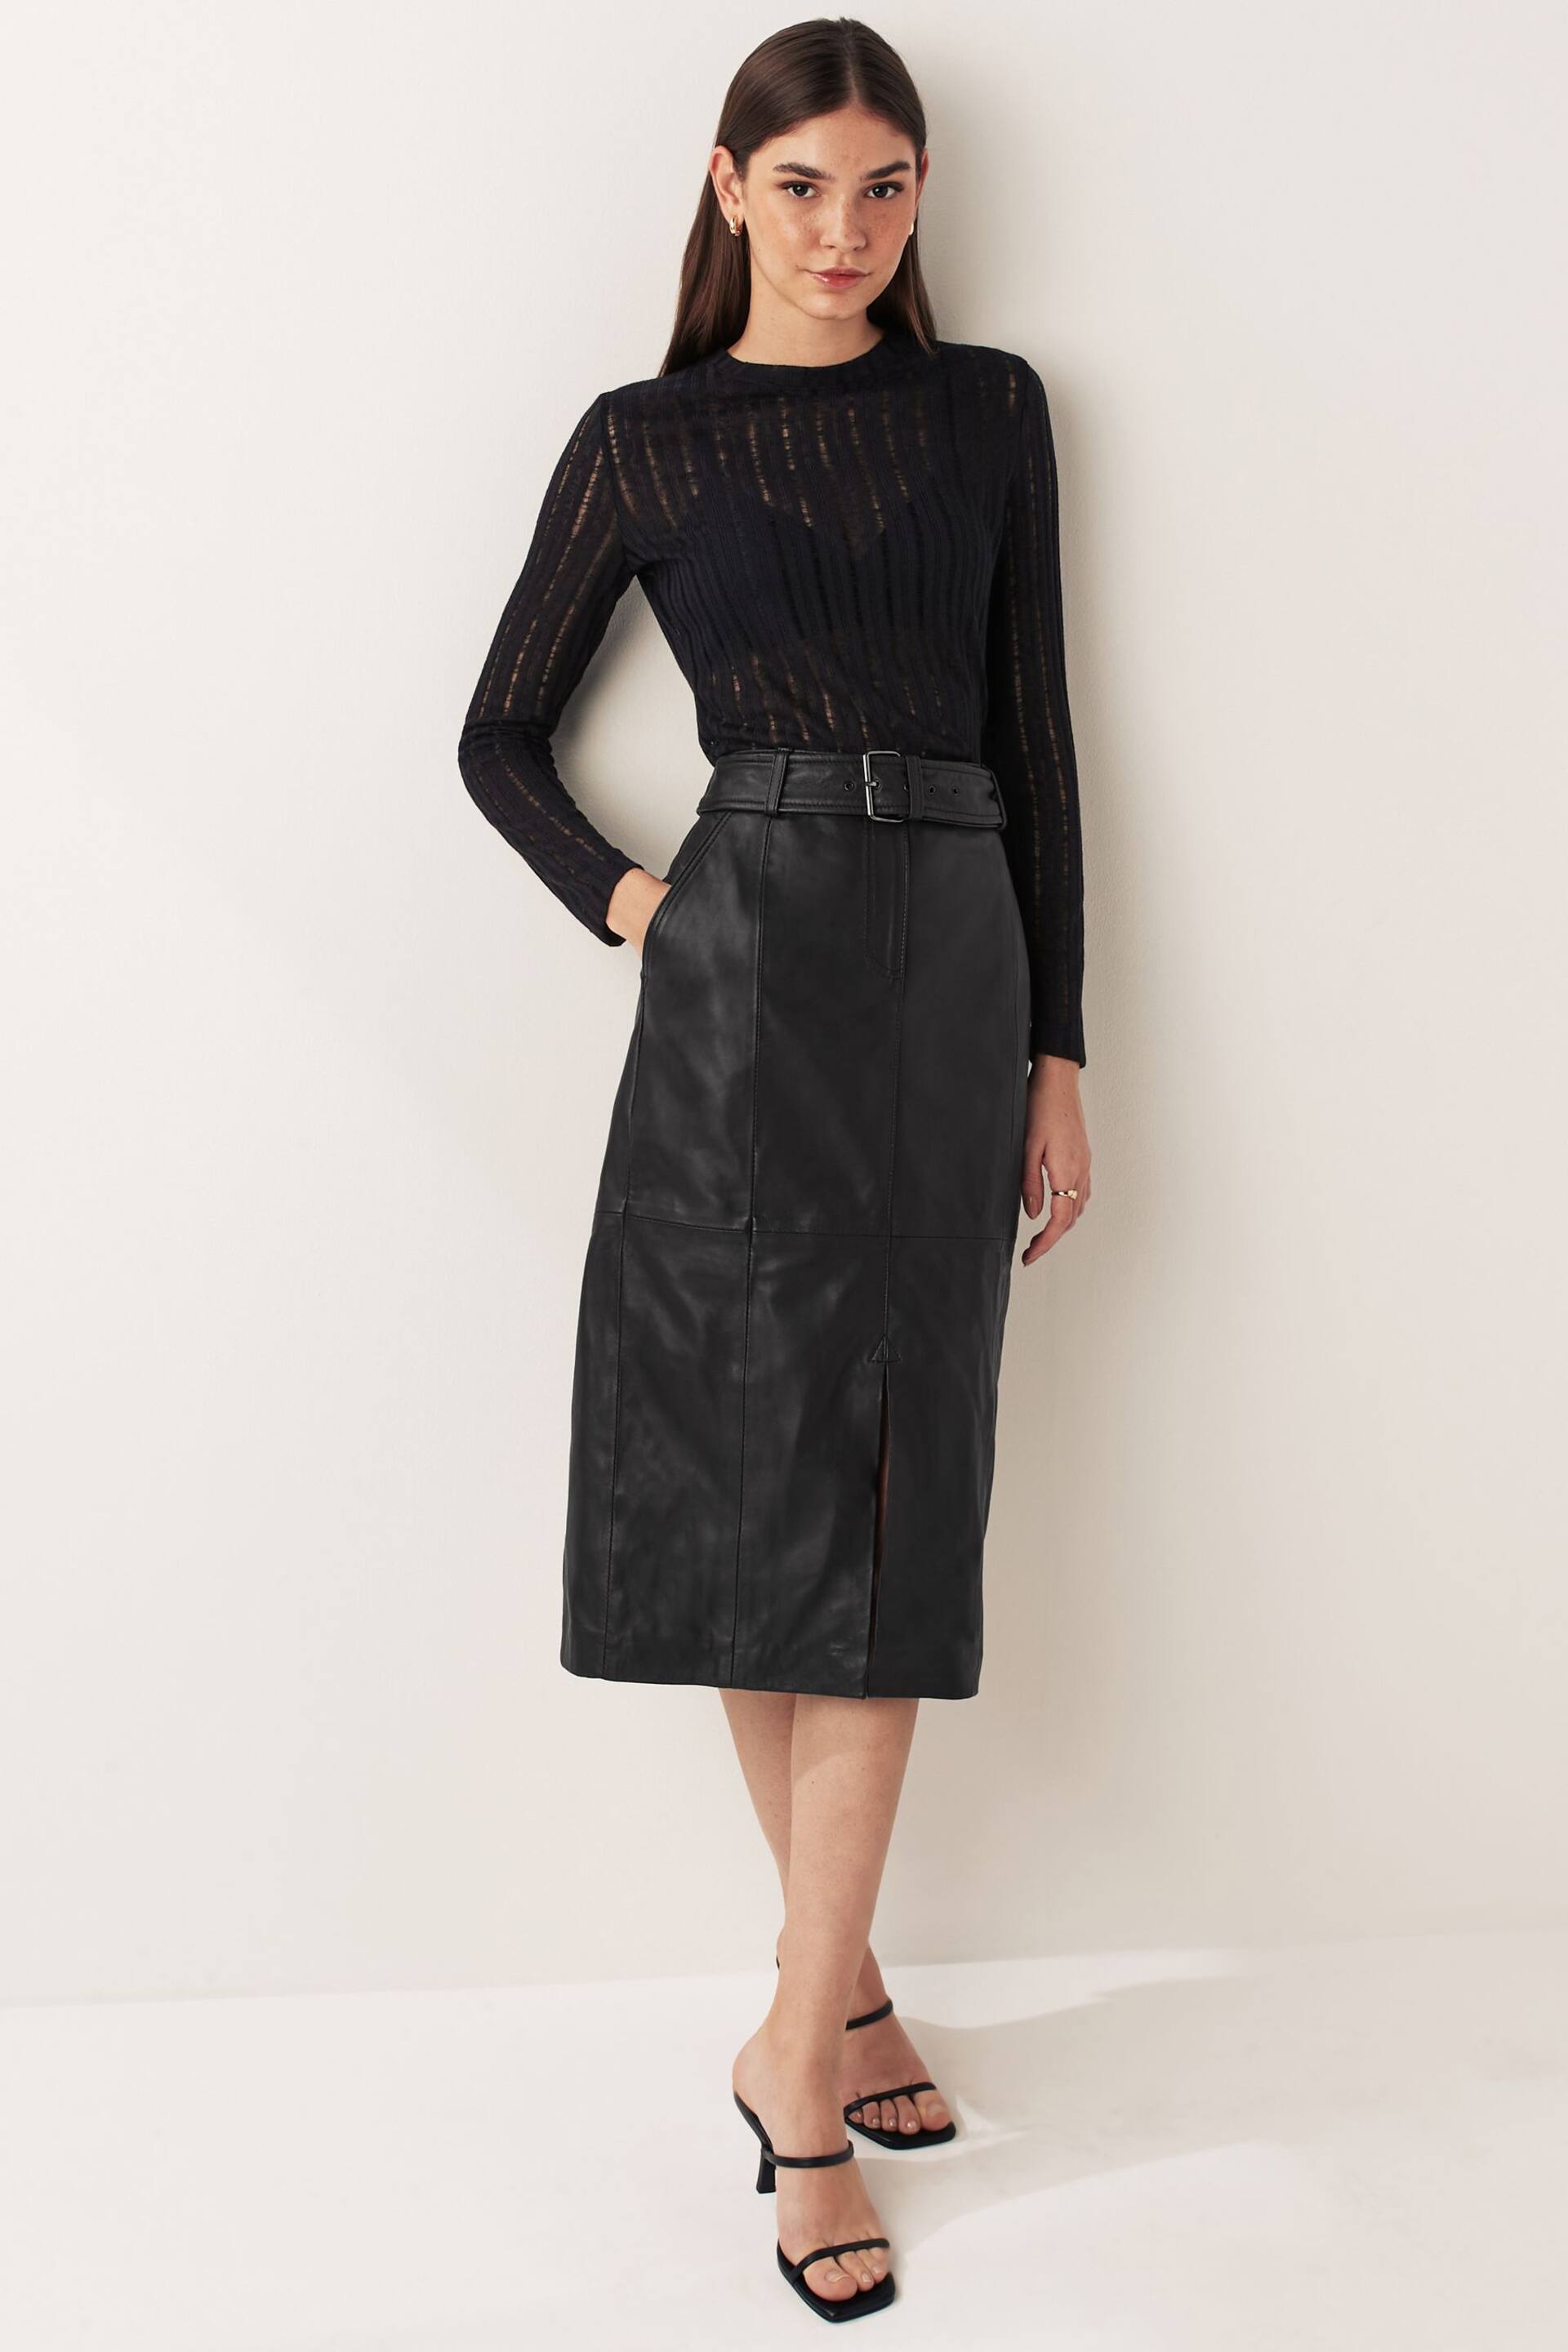 Urban Code Black Leather Front Split Midi Skirt With Removable Belt - Image 2 of 7